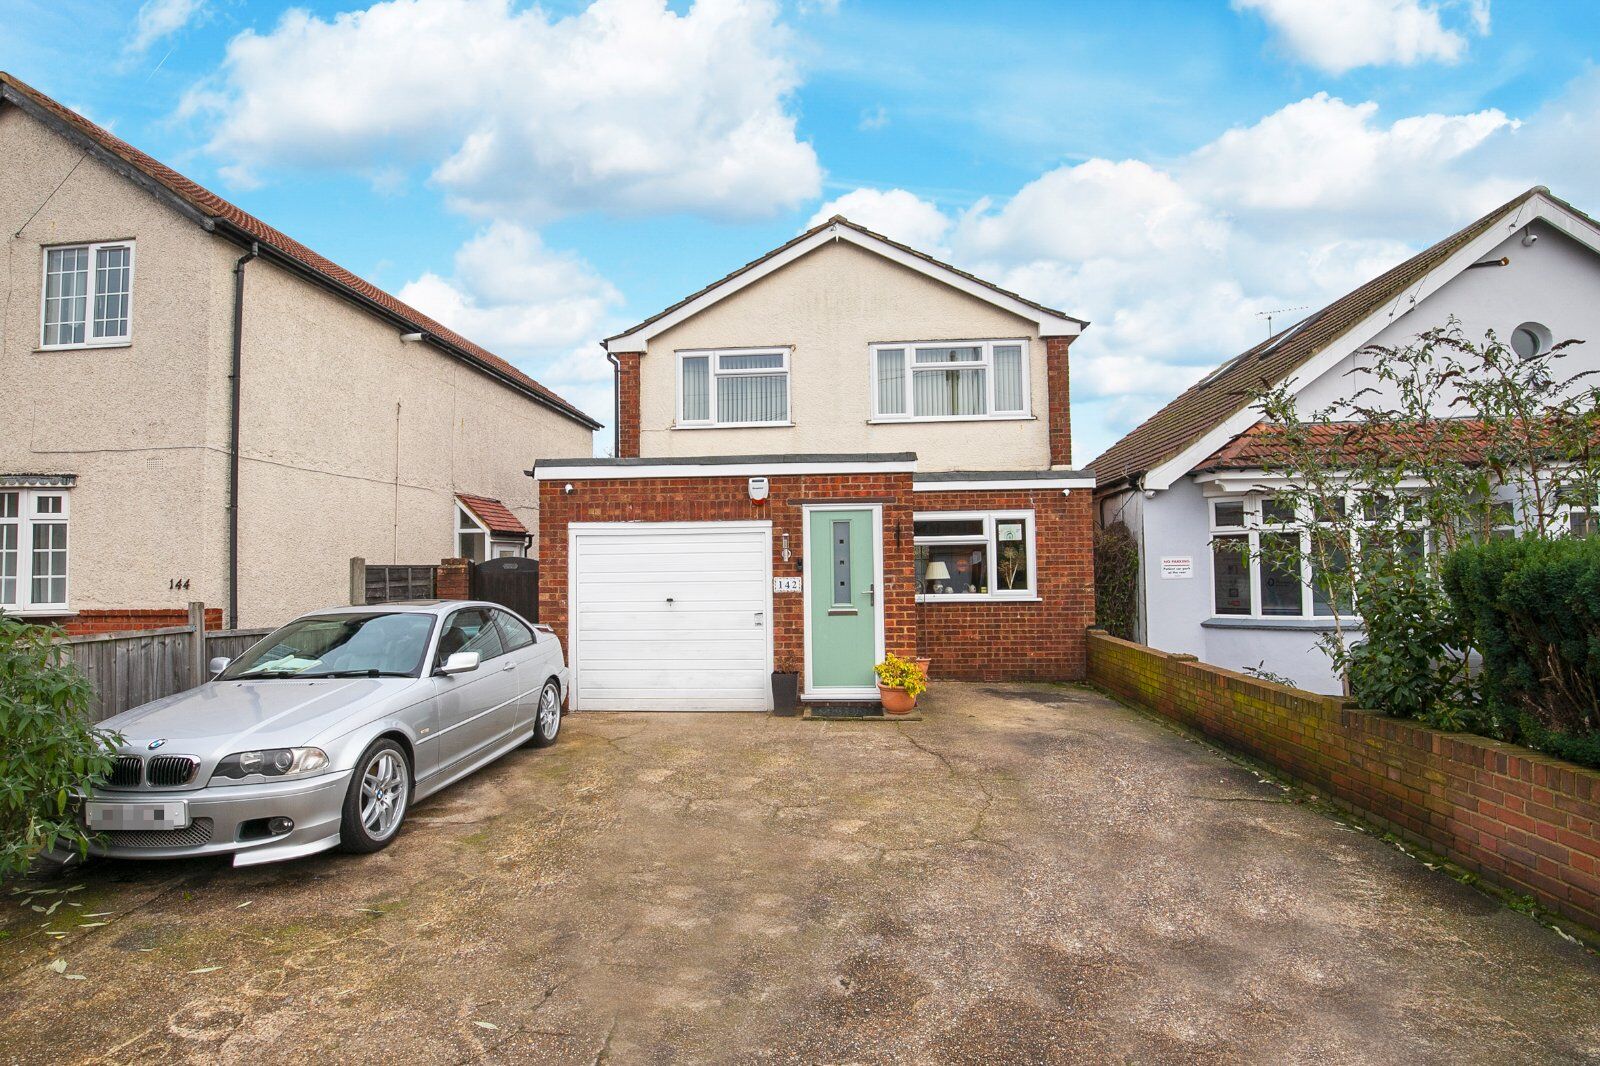 3 bedroom detached house for sale Tomswood Hill, Ilford, IG6, main image